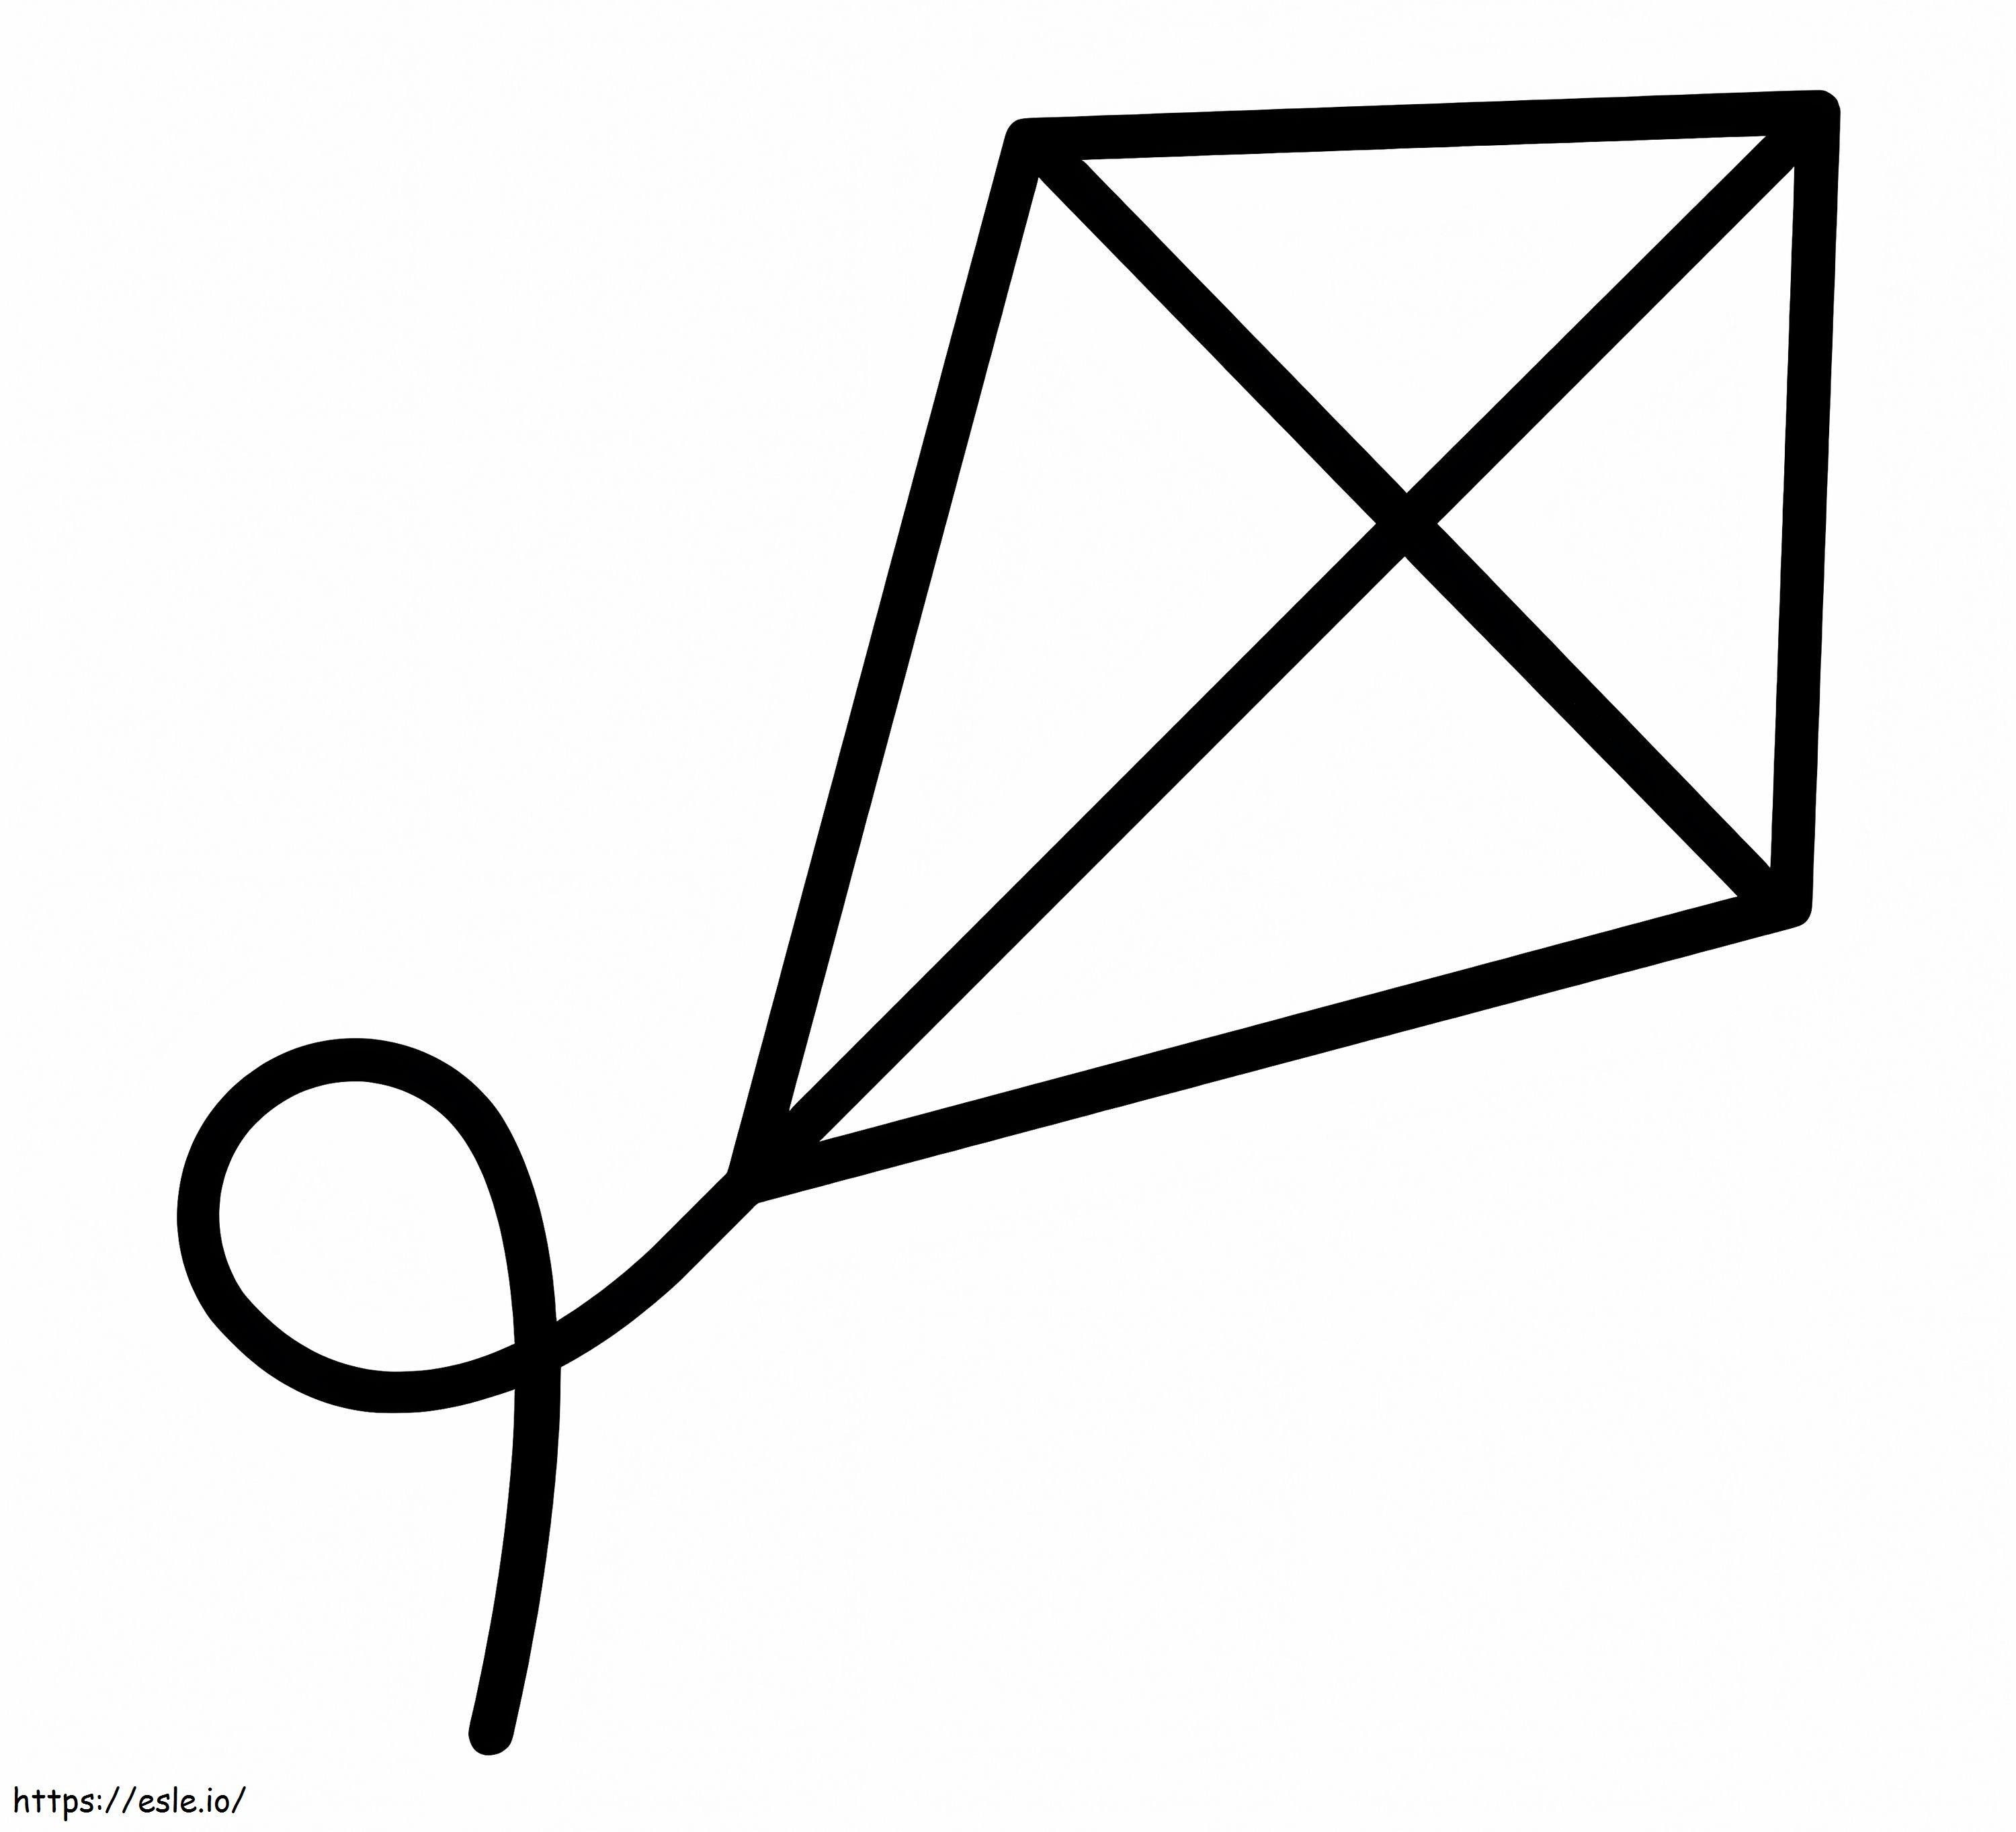 Kite 7 coloring page